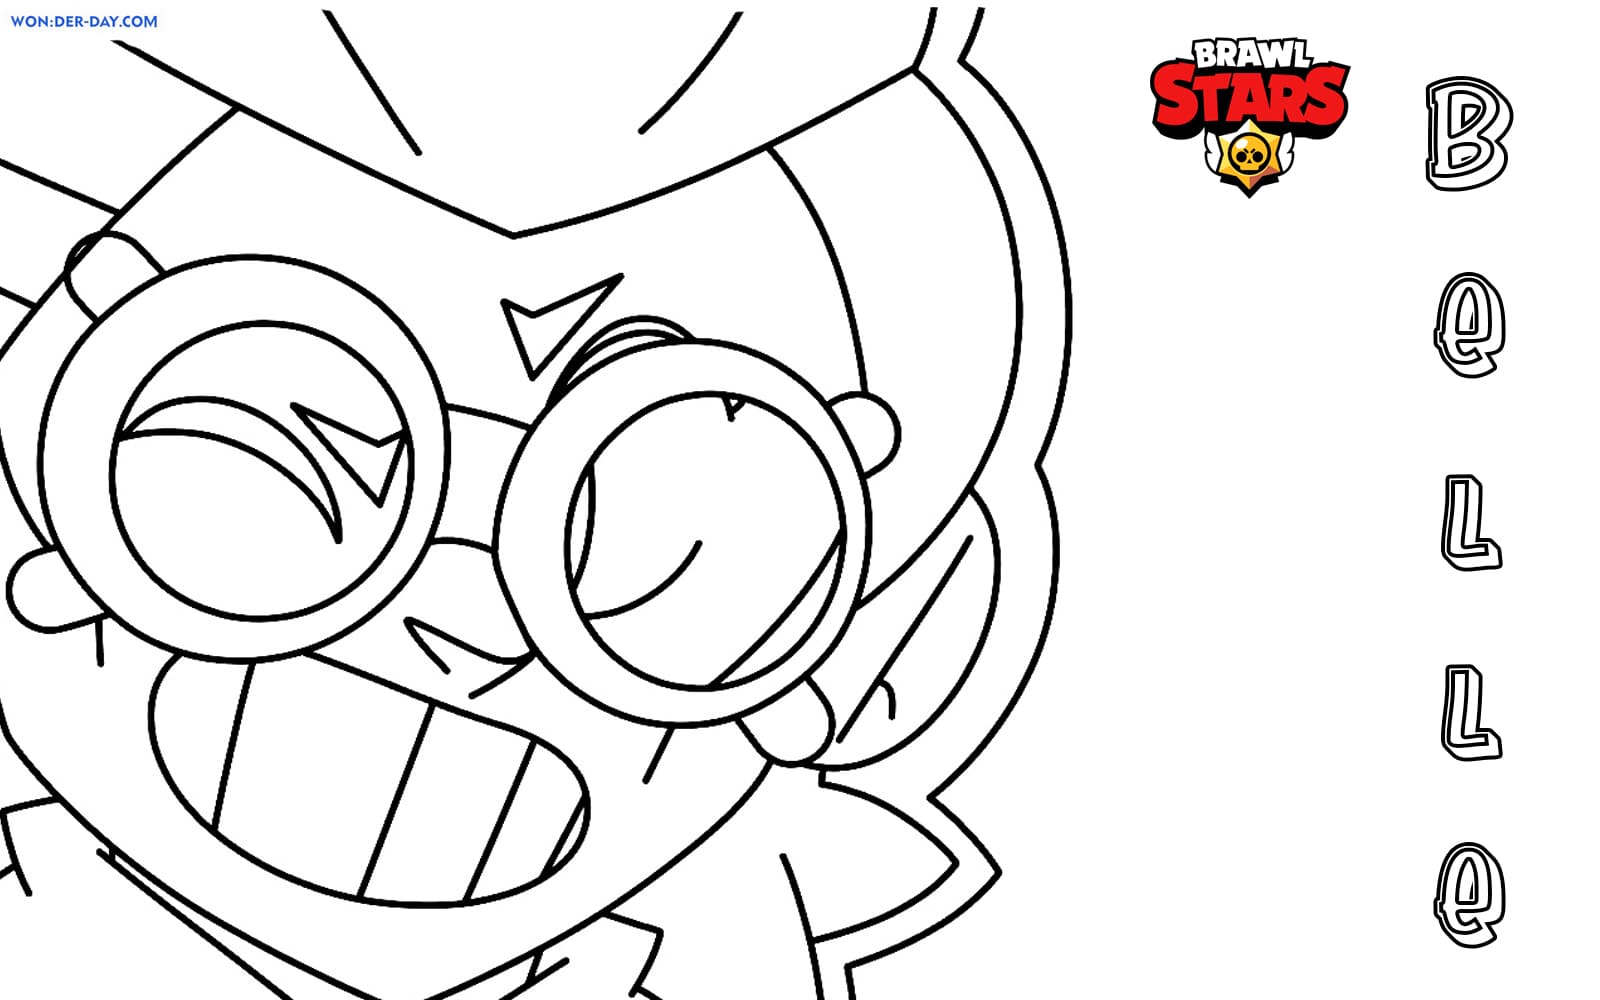 Belle Brawl Stars Coloring Pages Wonder Day Coloring Pages For Children And Adults - brawl stars desenho